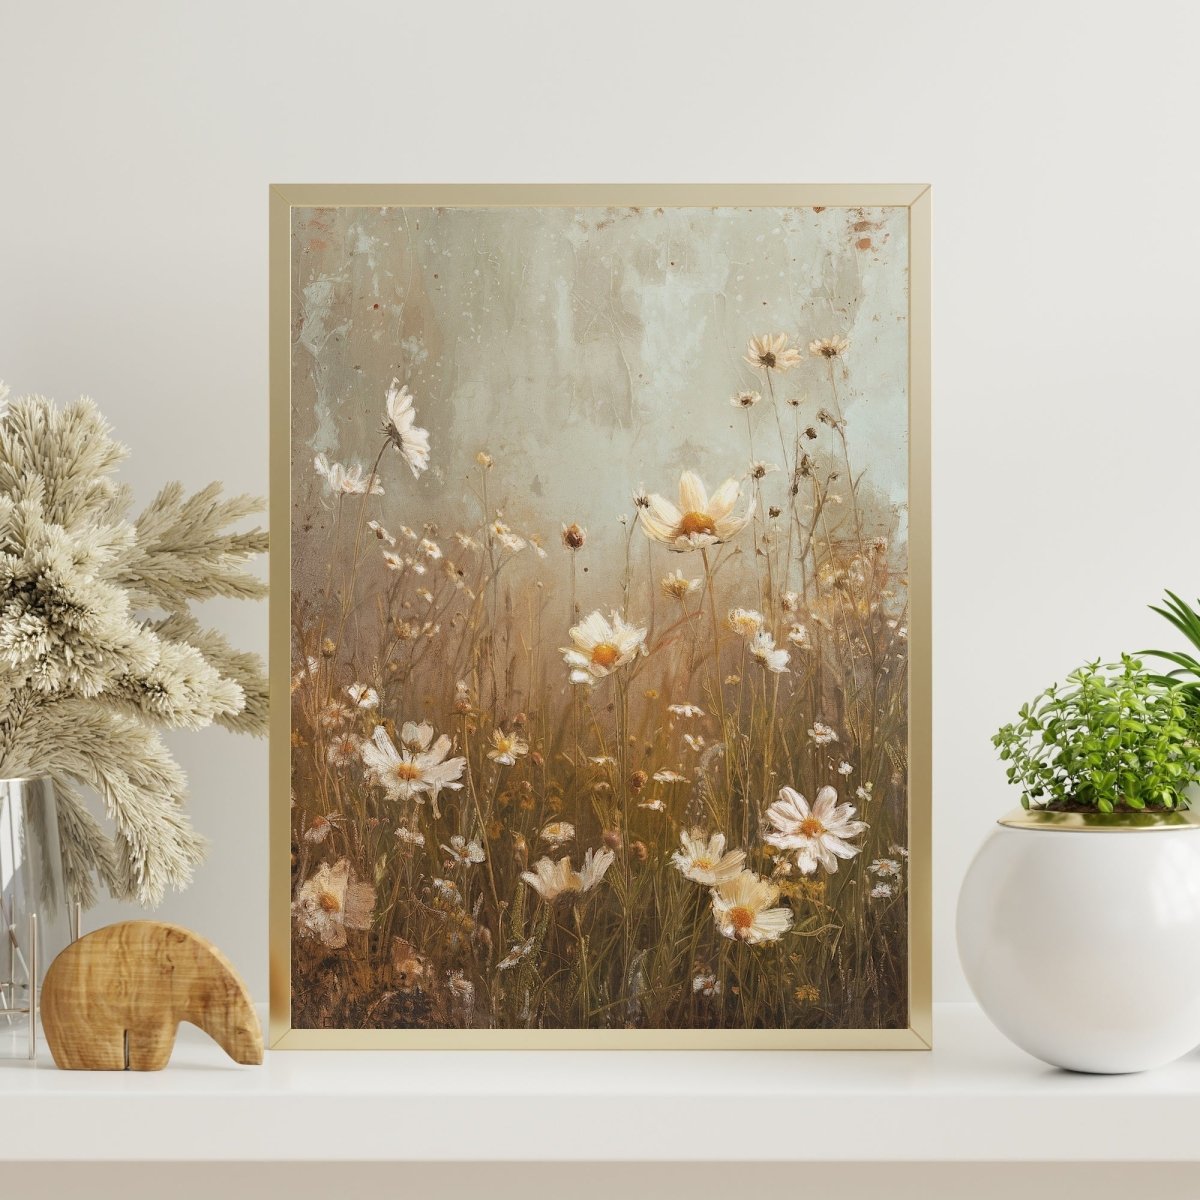 Vintage Daisy Flower Meadow Wall Art Print - Everything Pixel